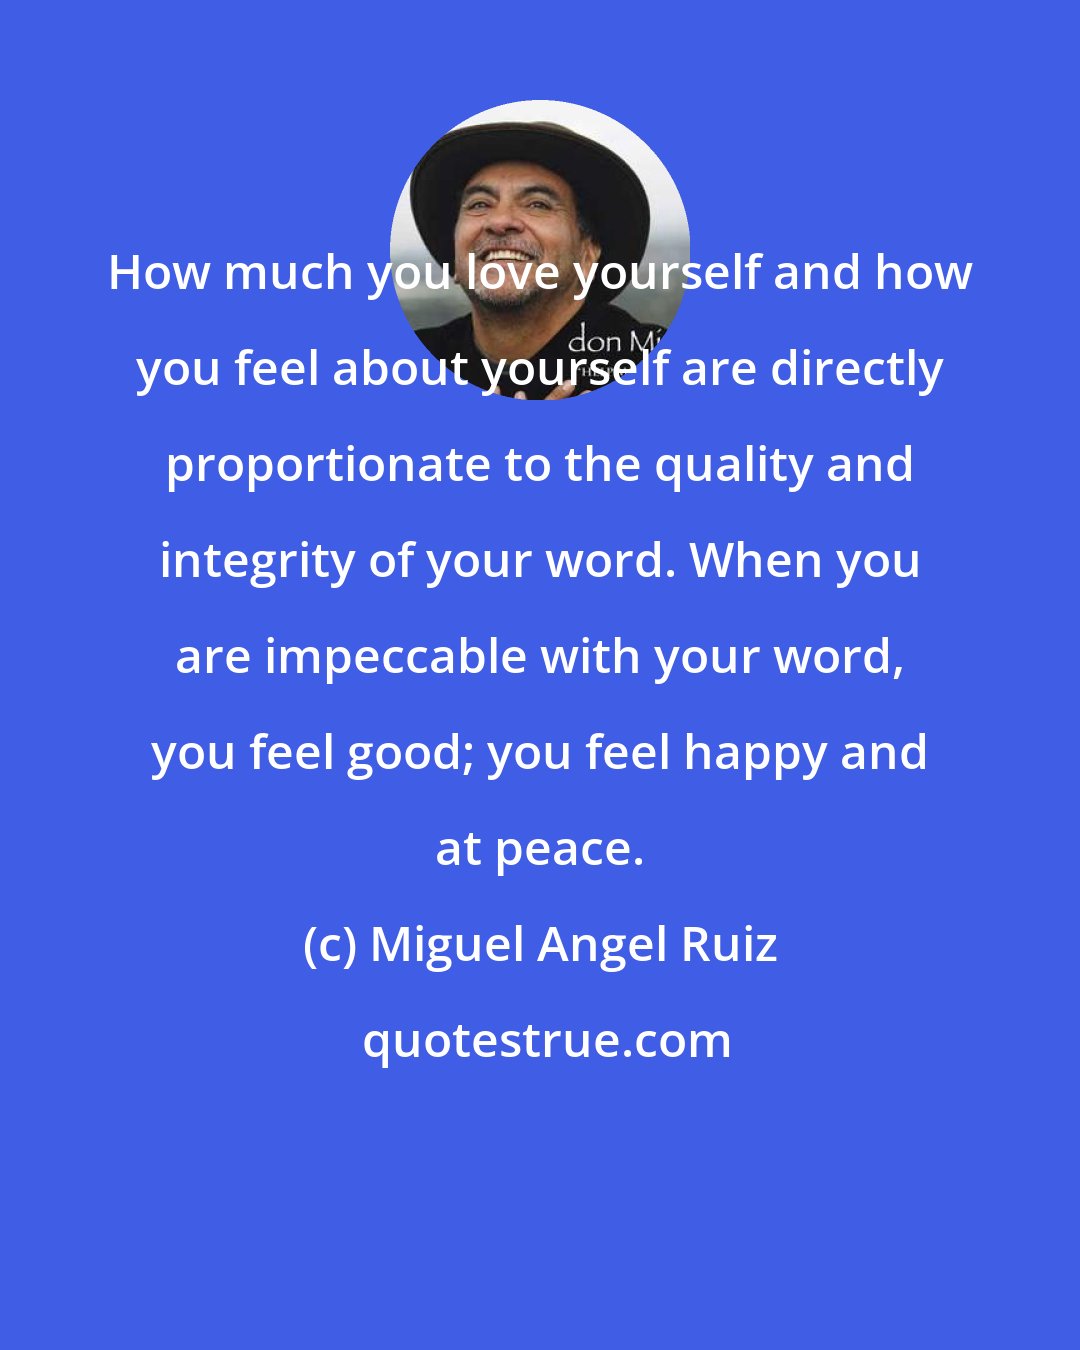 Miguel Angel Ruiz: How much you love yourself and how you feel about yourself are directly proportionate to the quality and integrity of your word. When you are impeccable with your word, you feel good; you feel happy and at peace.